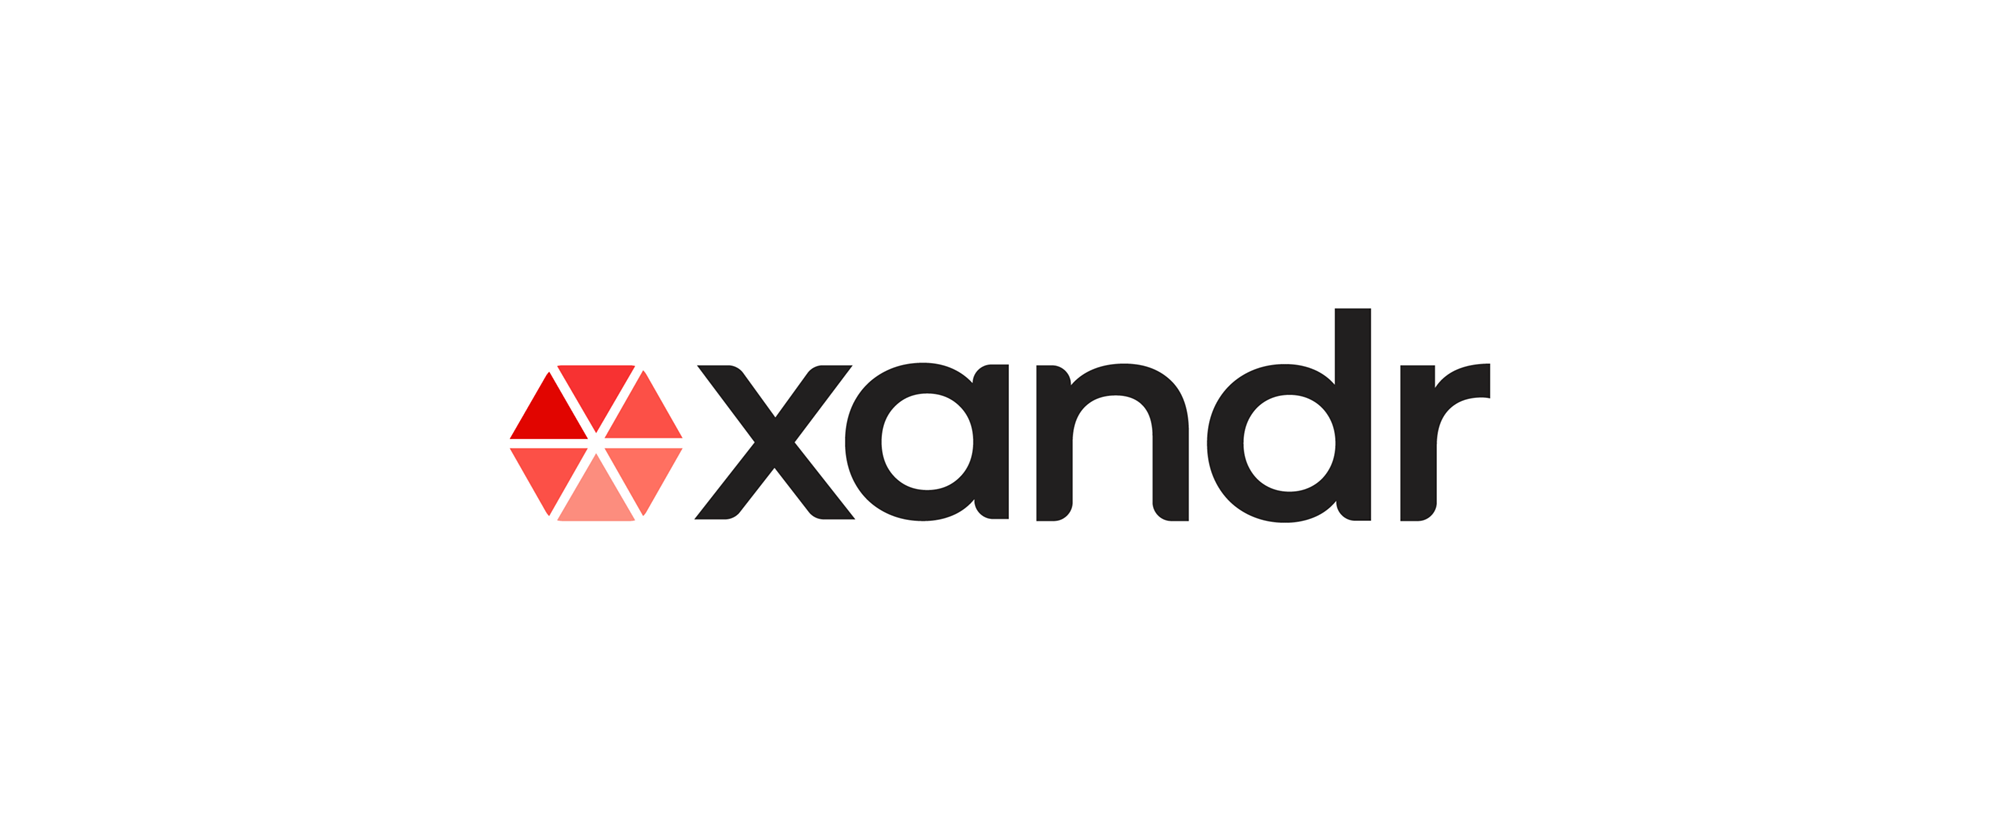 New Name and Logo for Xandr